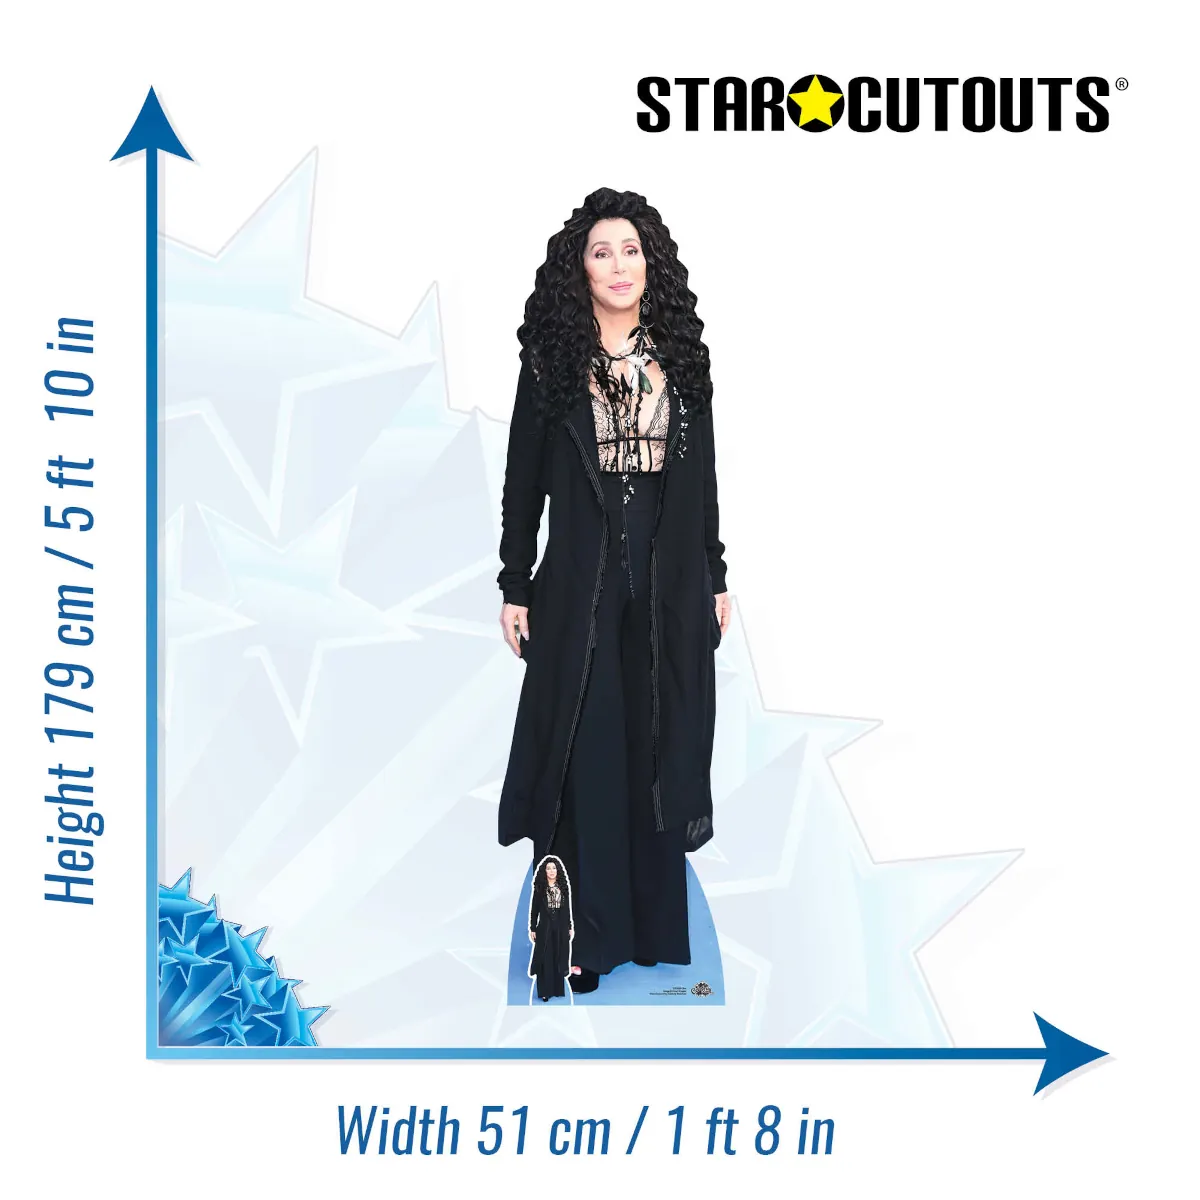 CS1038 Cher 'Black Outfit' (American Singer) Lifesize + Mini Cardboard Cutout Standee Size